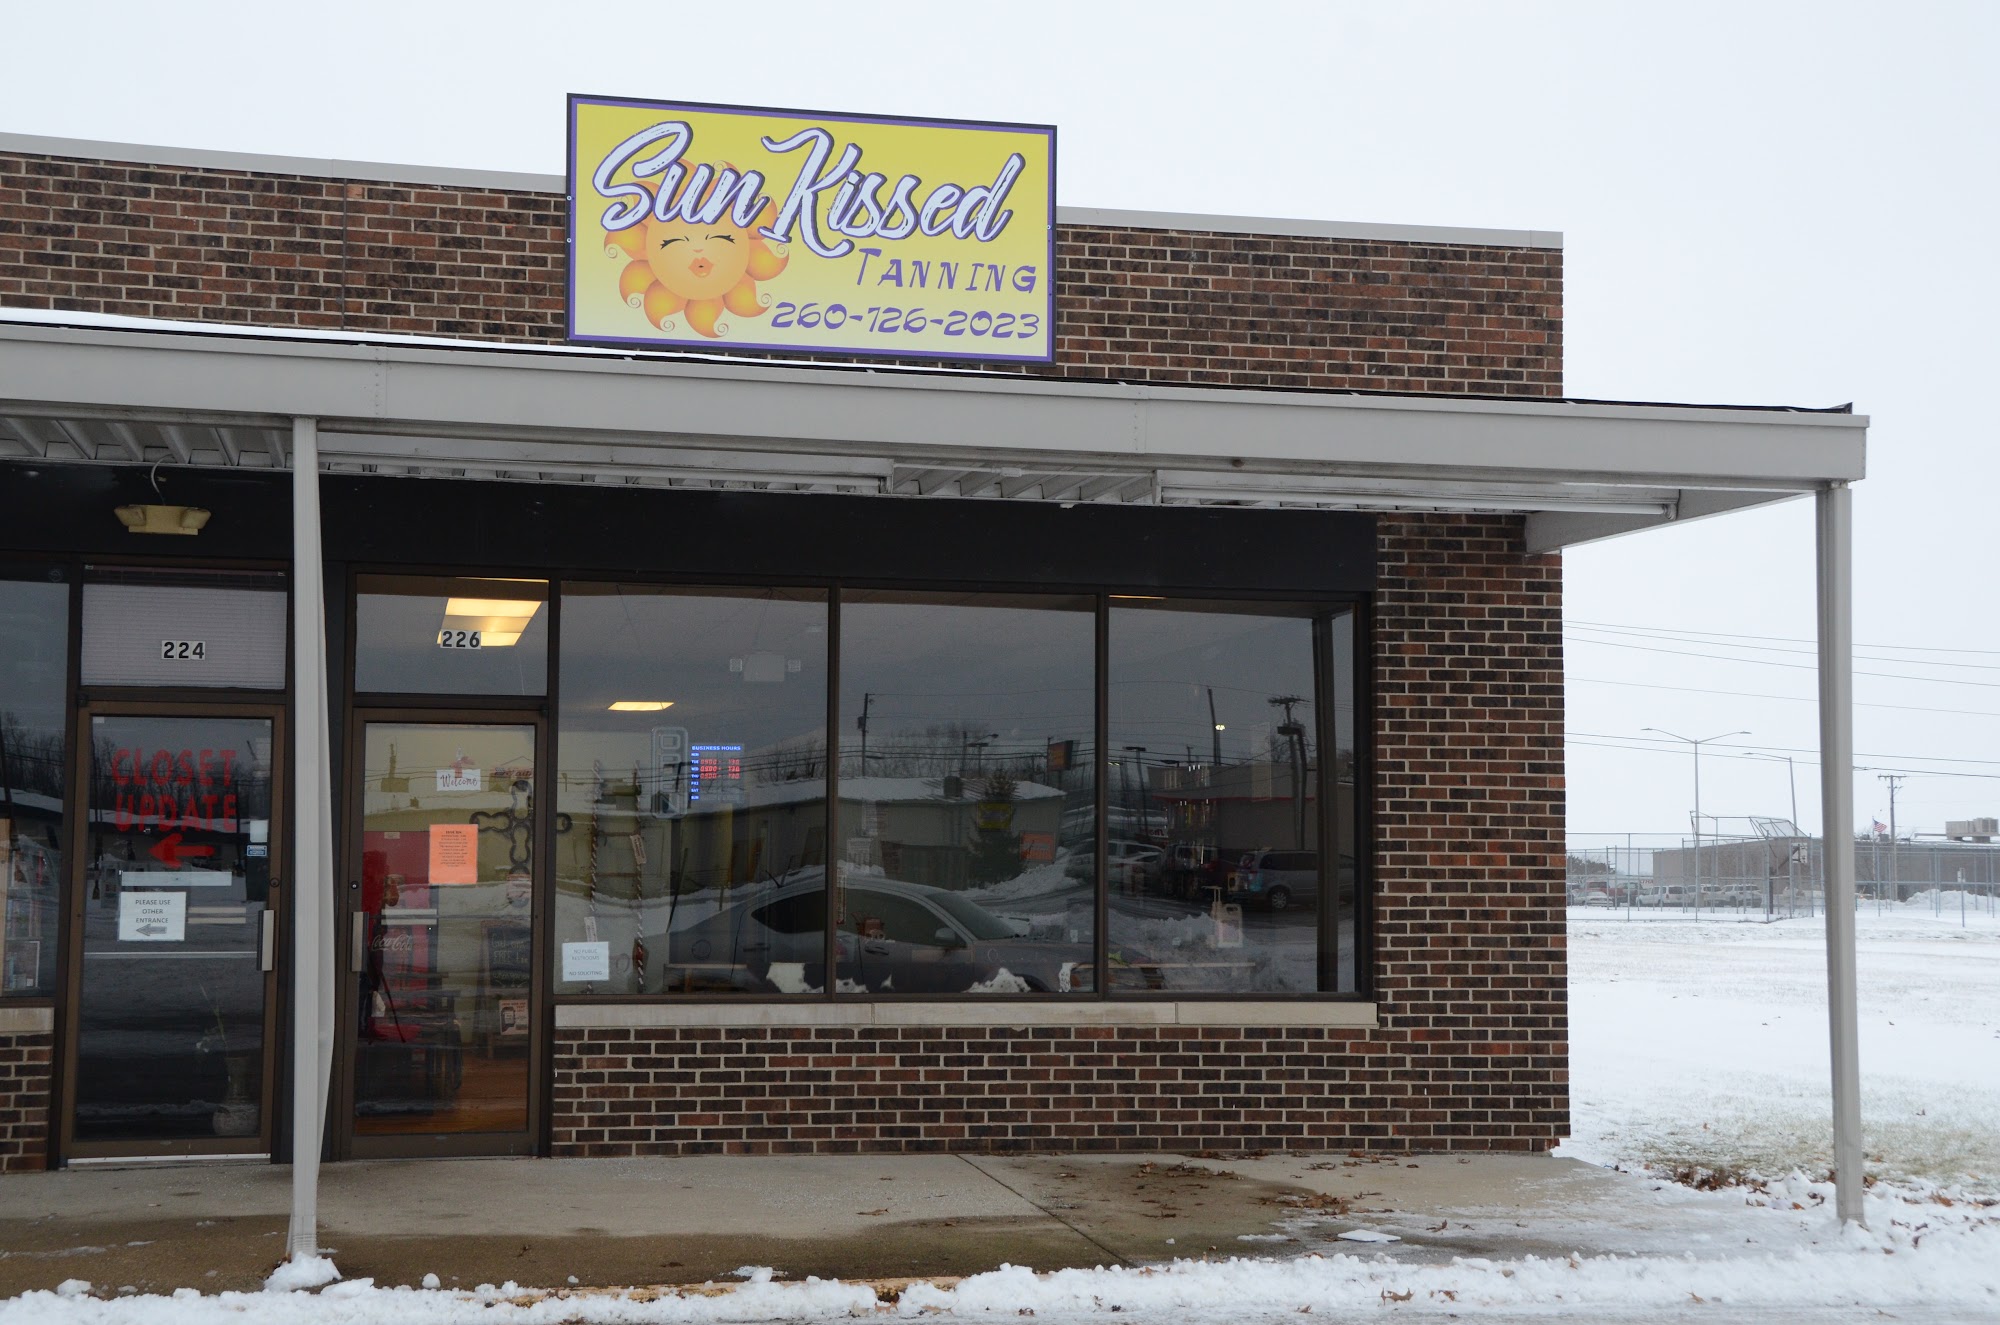 SunKissed Tanning 226 W NW Lincoln Ave, Portland Indiana 47371